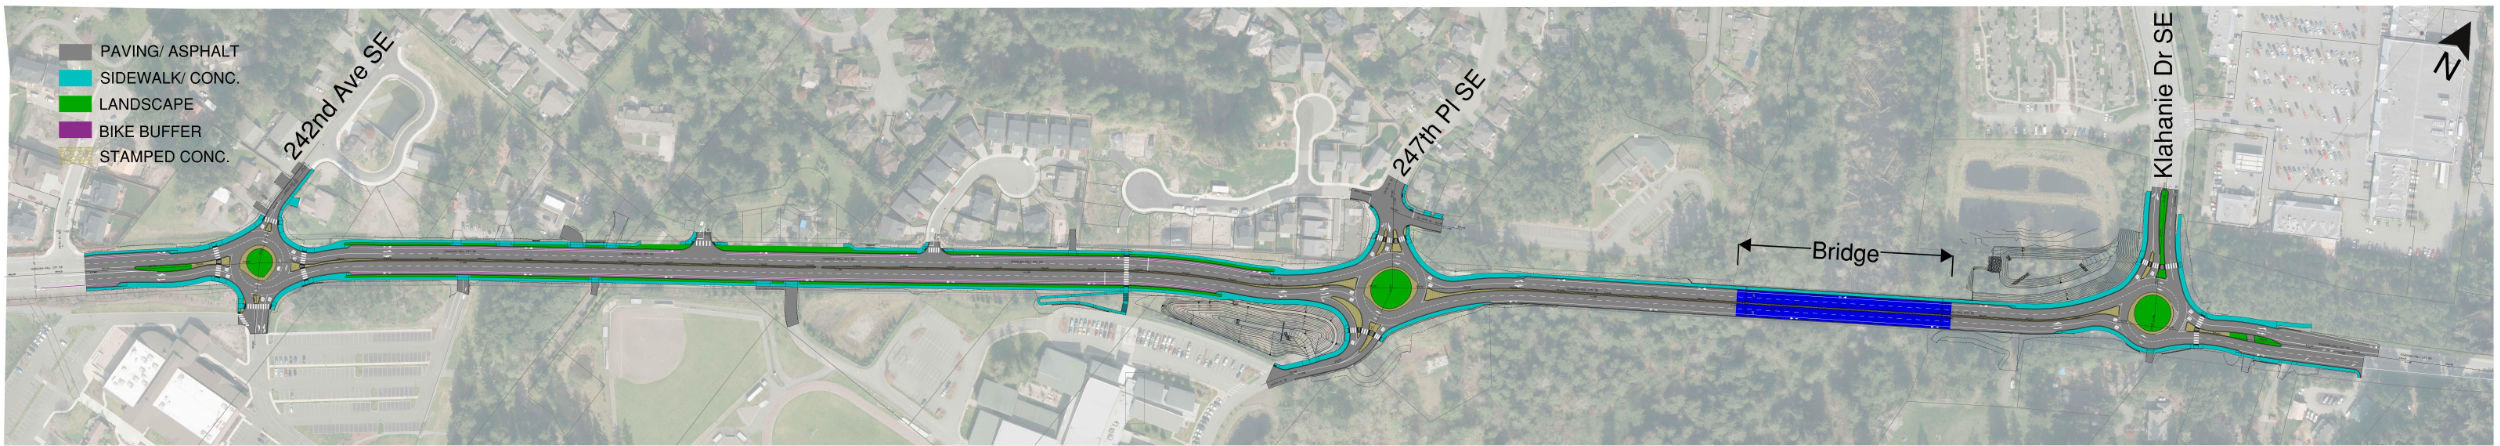 full length plan for Issaquah Fall City Road phase 1 project showing three roundabouts and bridge